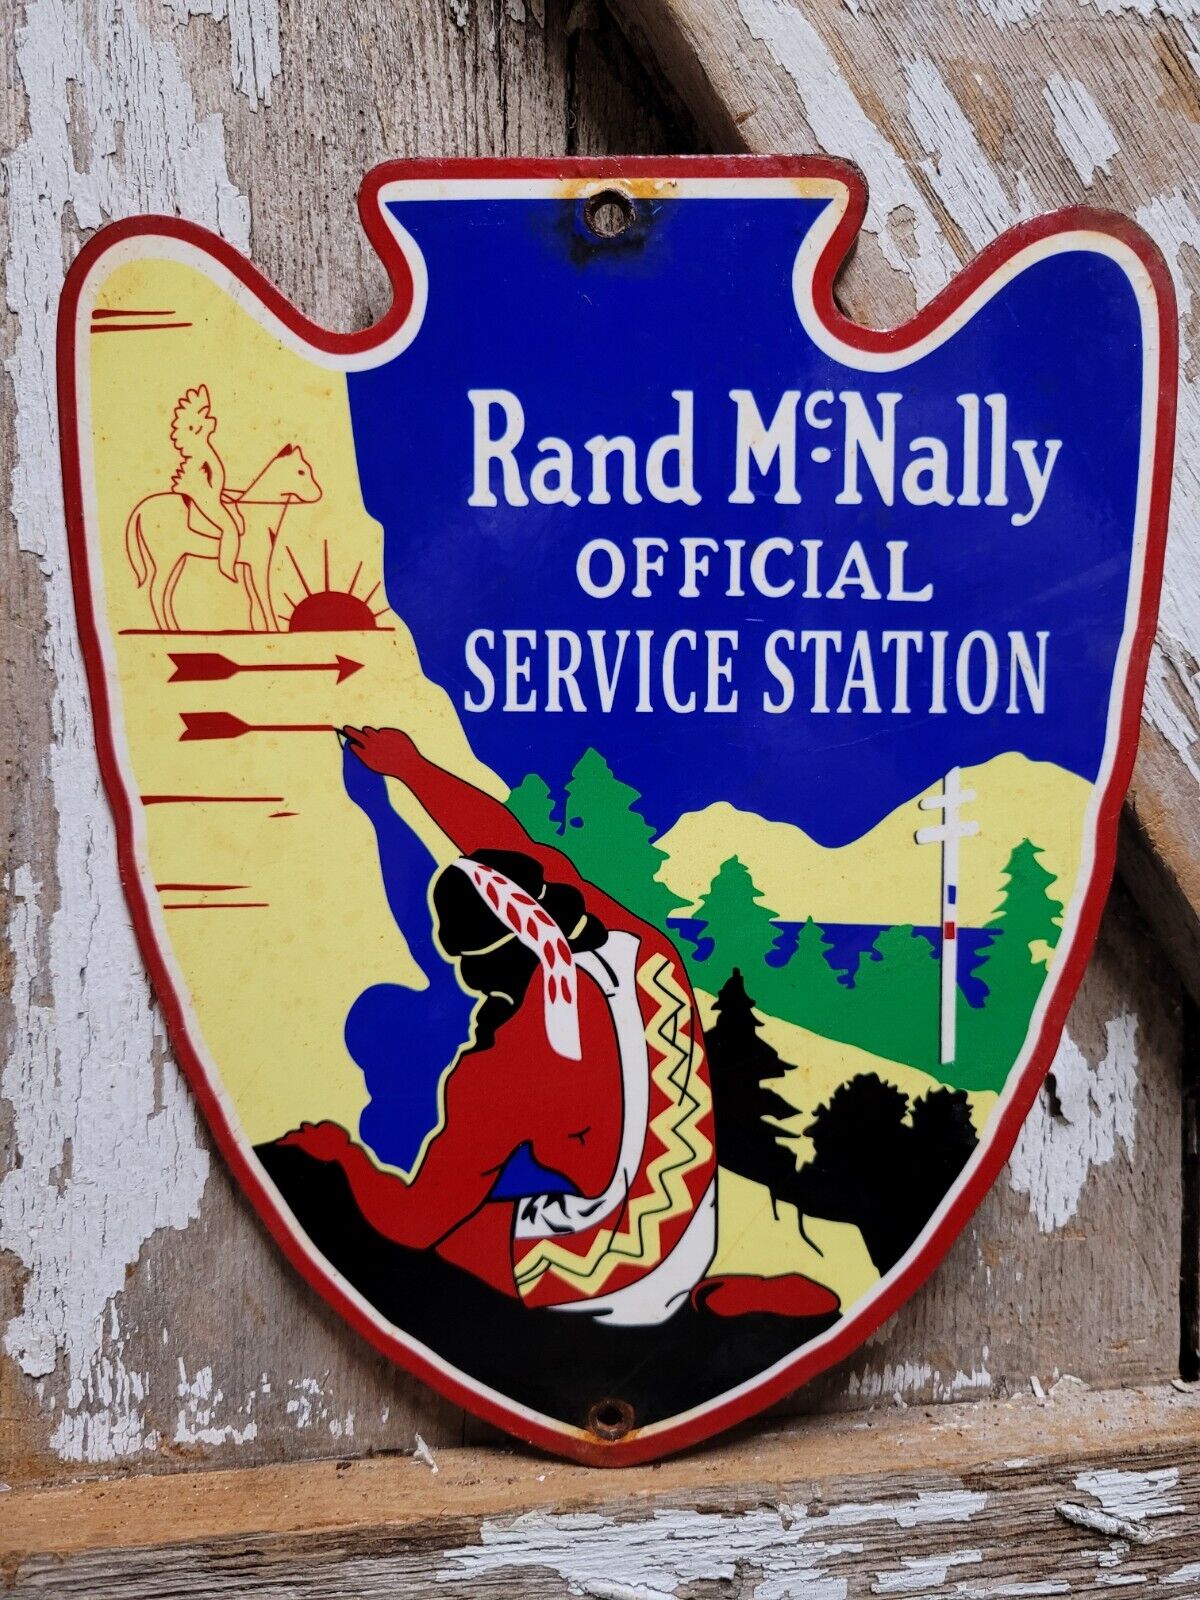 VINTAGE RAND MCNALLY PORCELAIN SIGN OFFICIAL SERVICE STATION HIGHWAY MAP ARROW